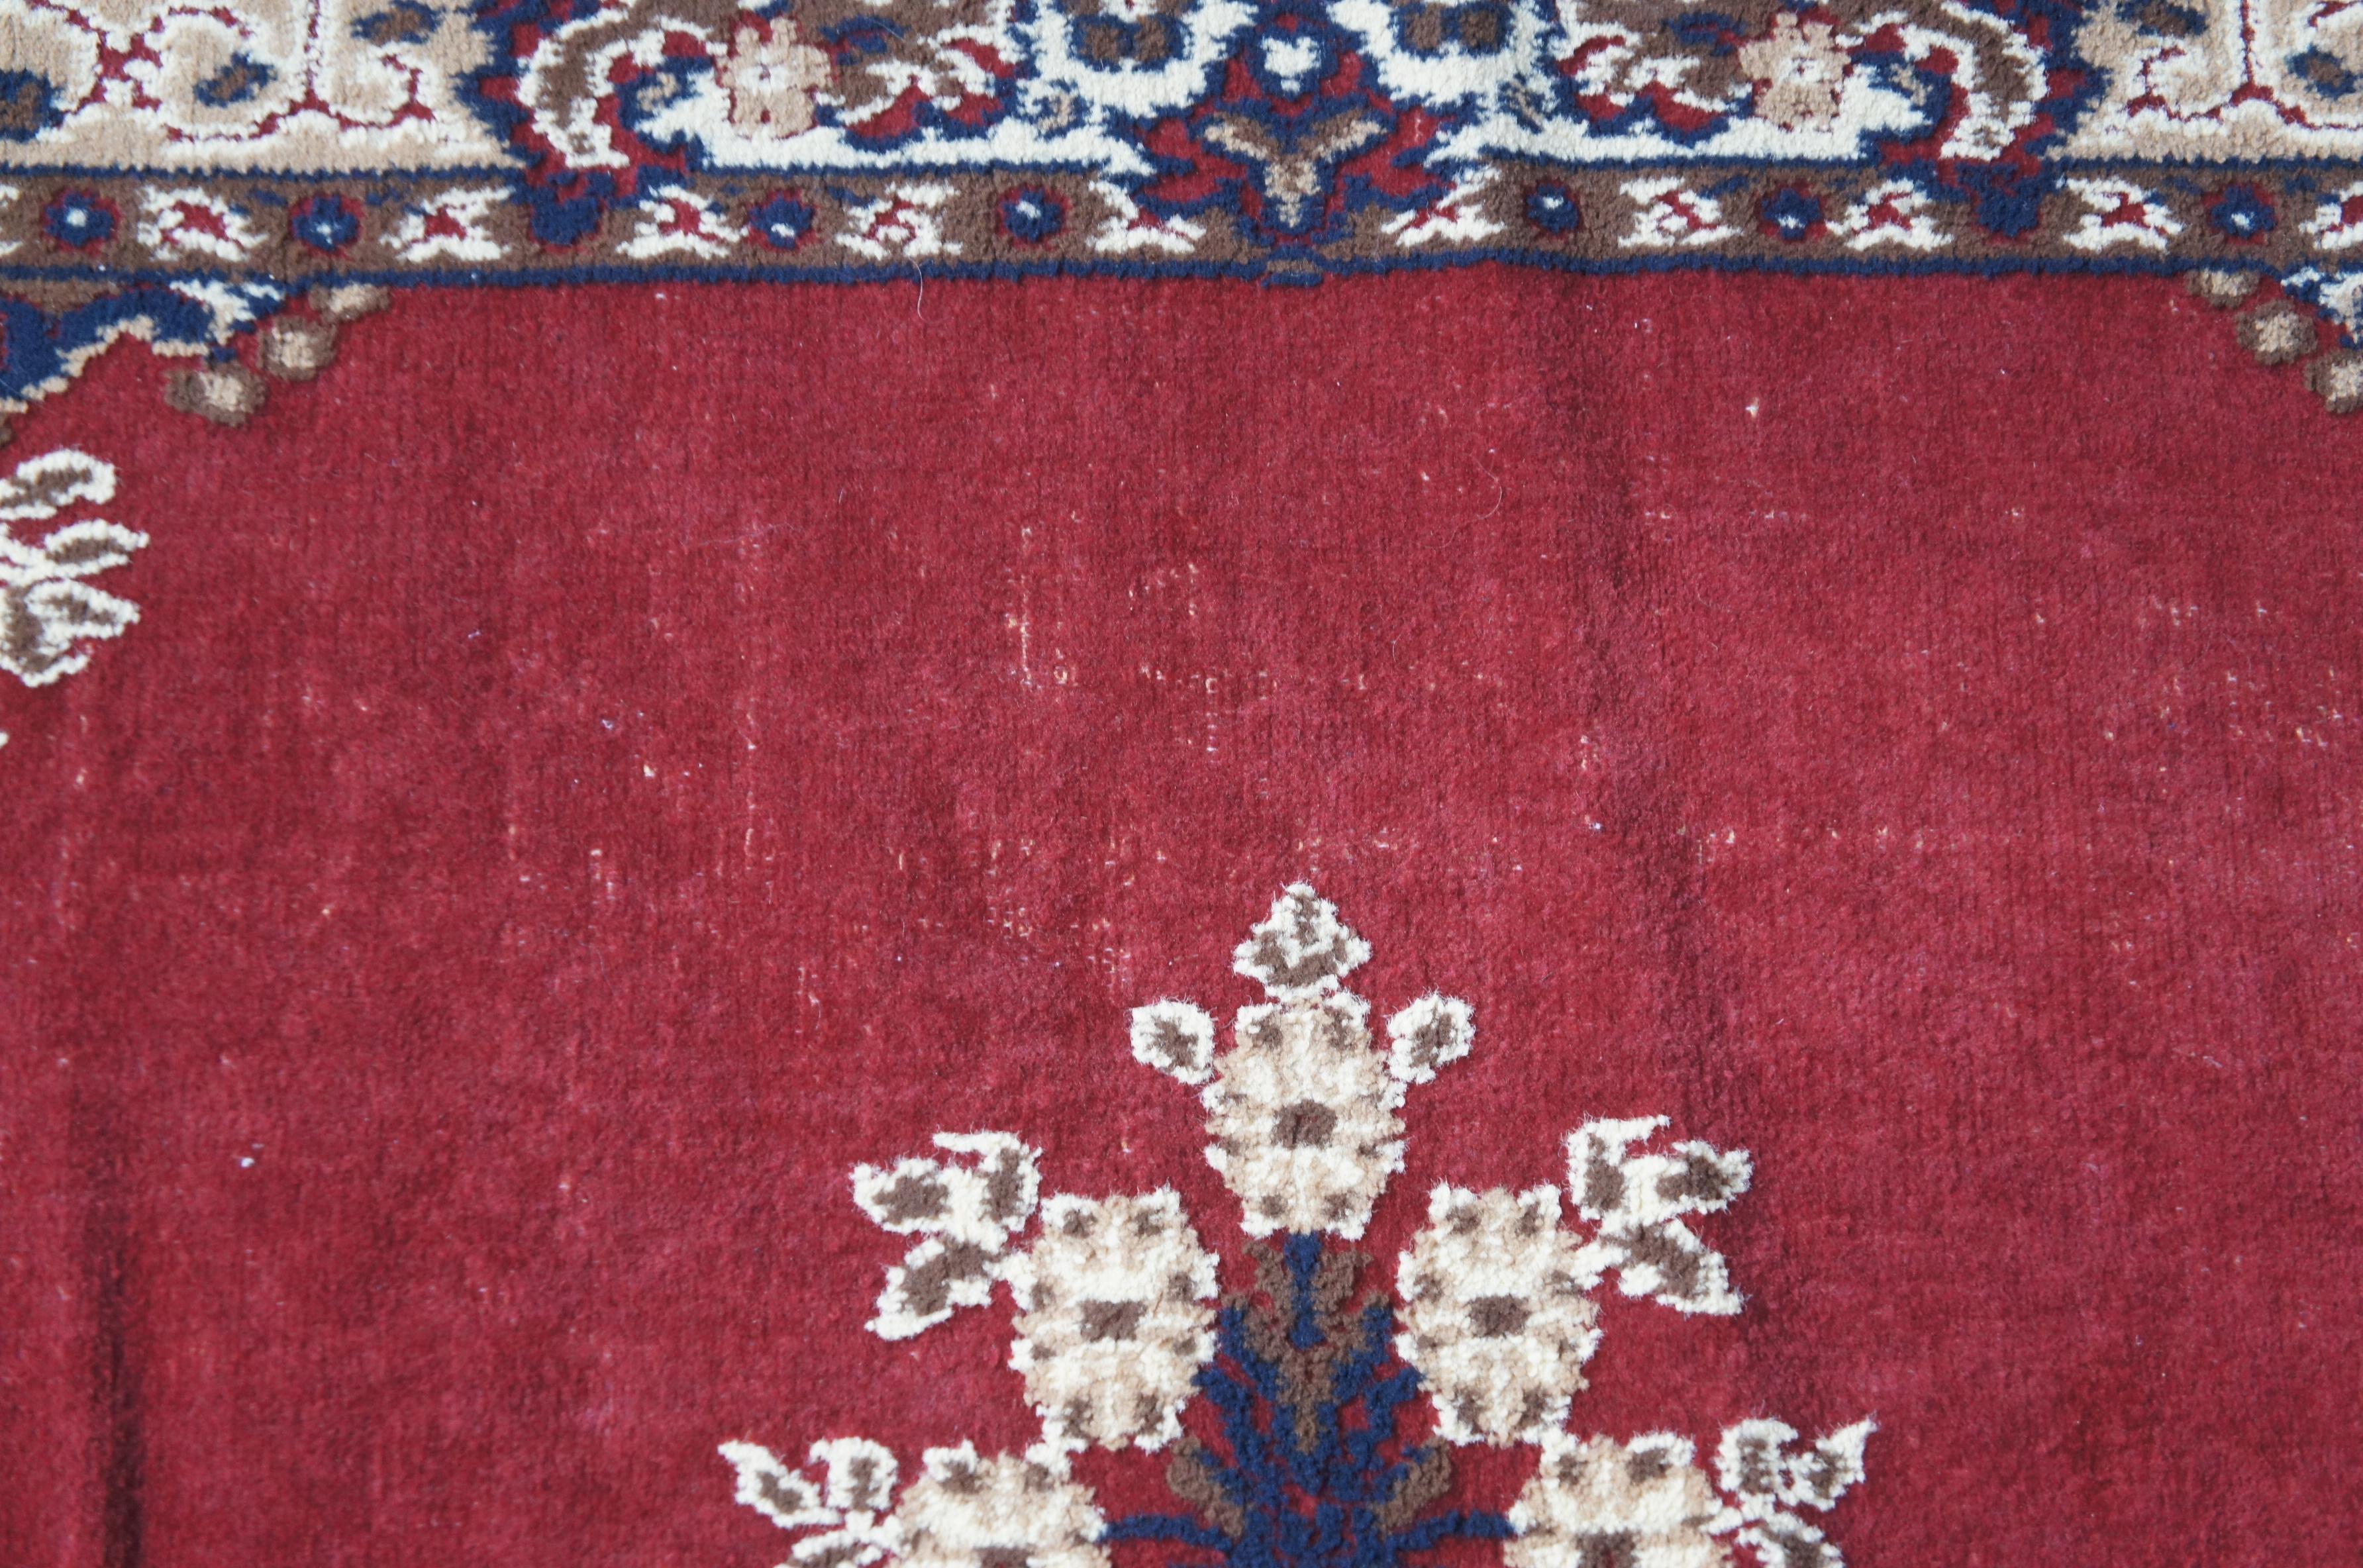 Beaulieu of America Wolefin V 100% Yarn Red Medallion Floral Area Rug Carpet 11' For Sale 1